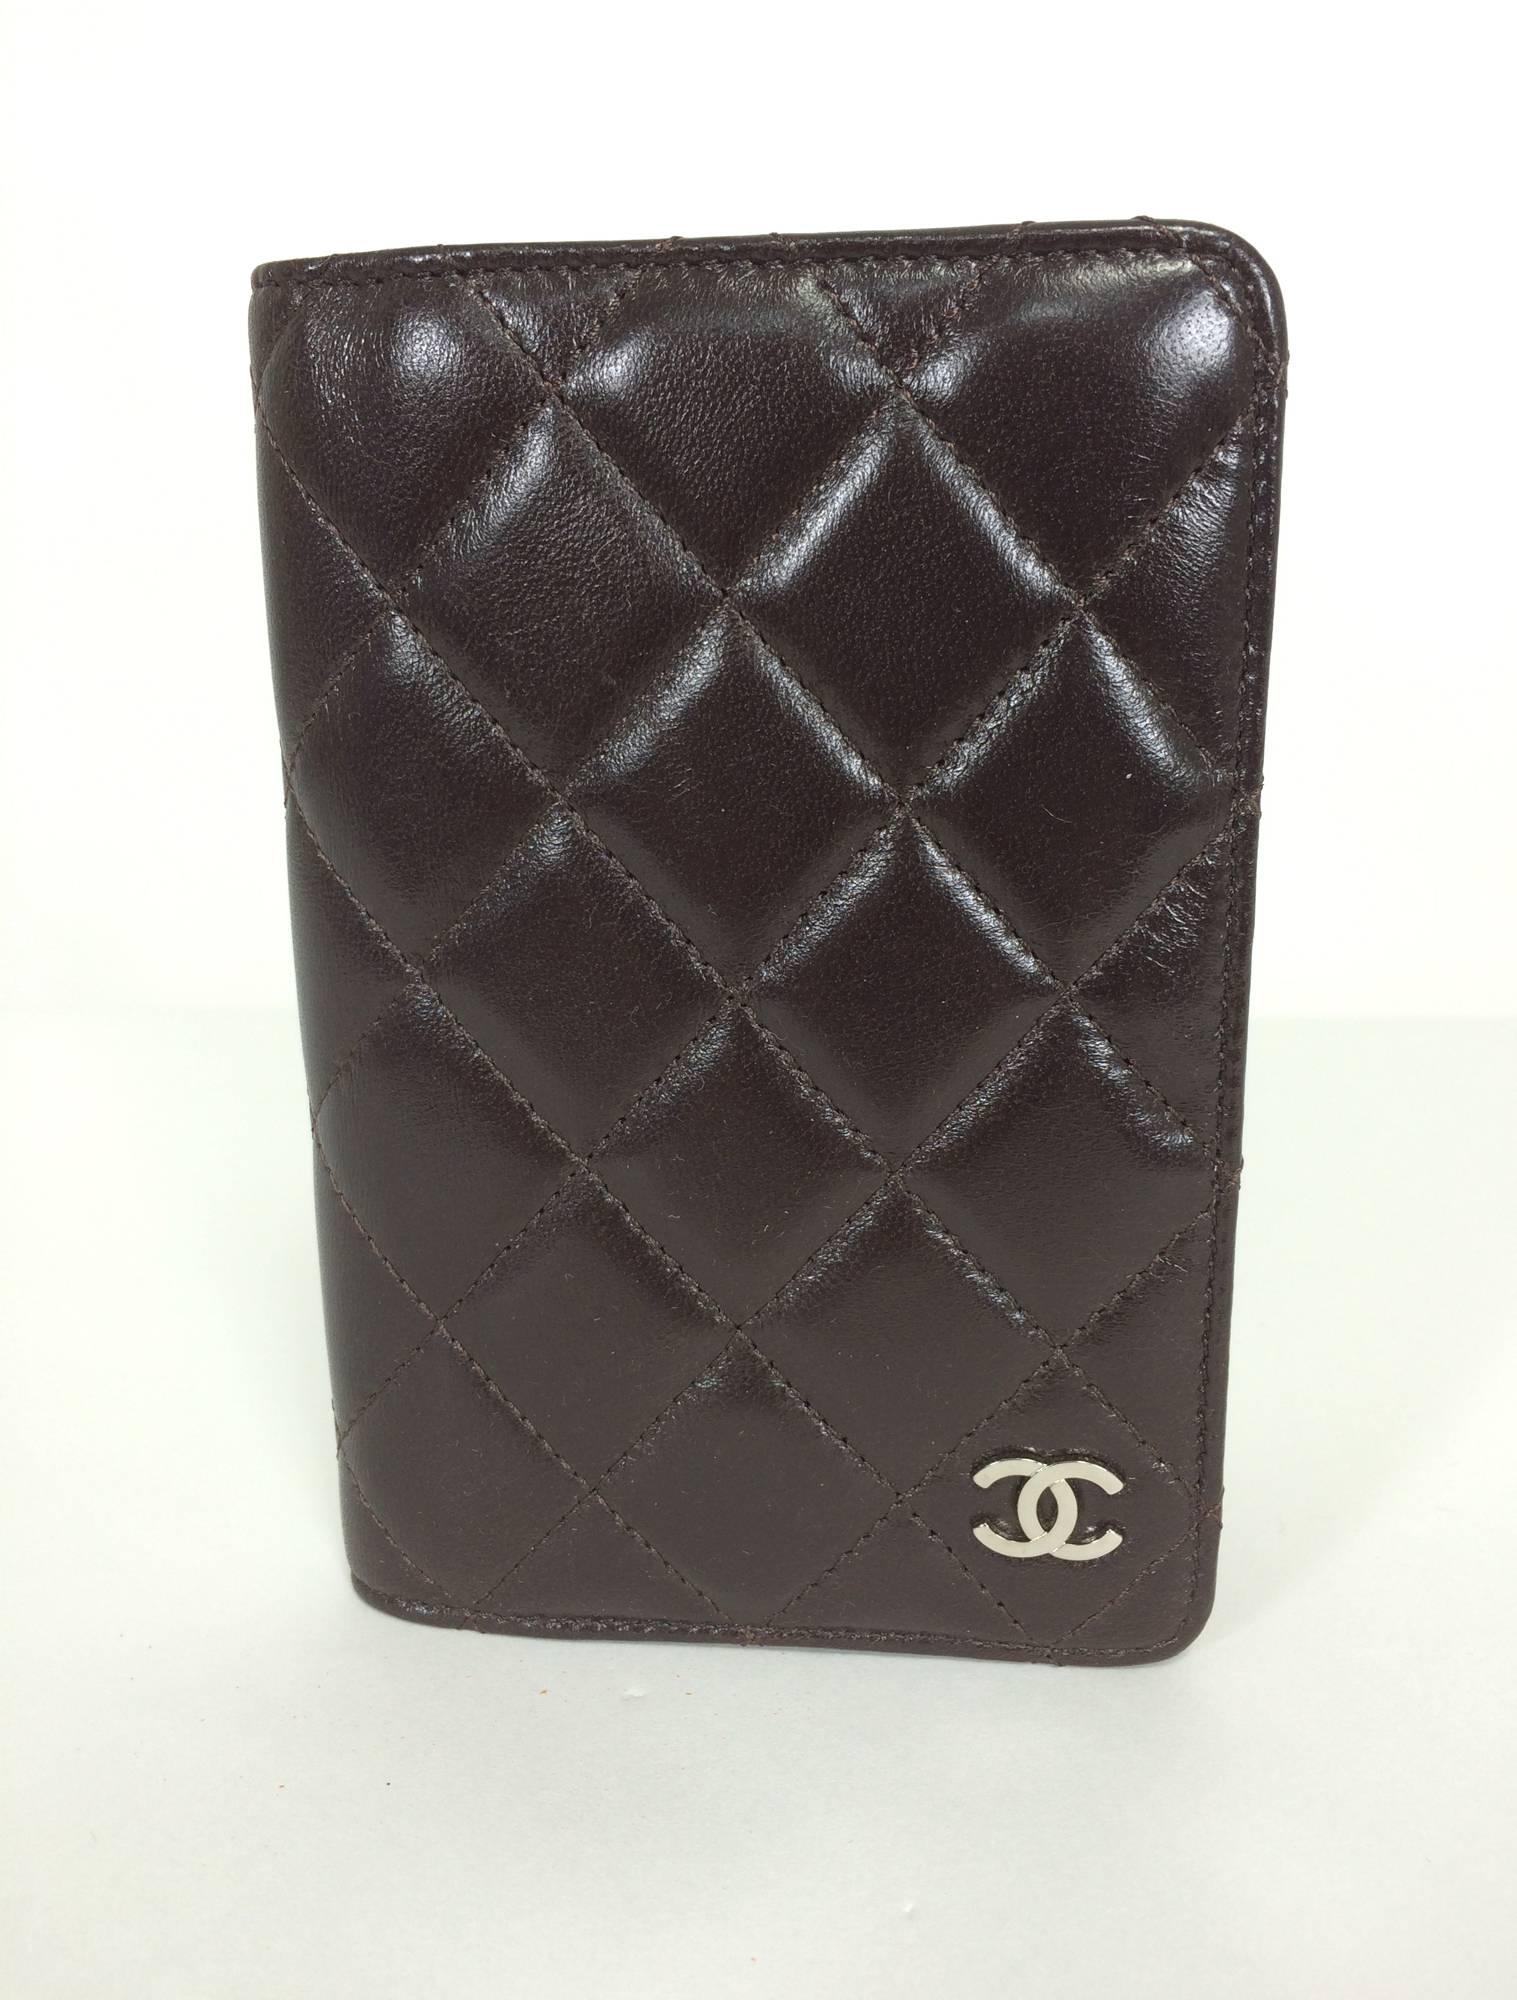 Chanel quilted leather datebook 2009 unused  1